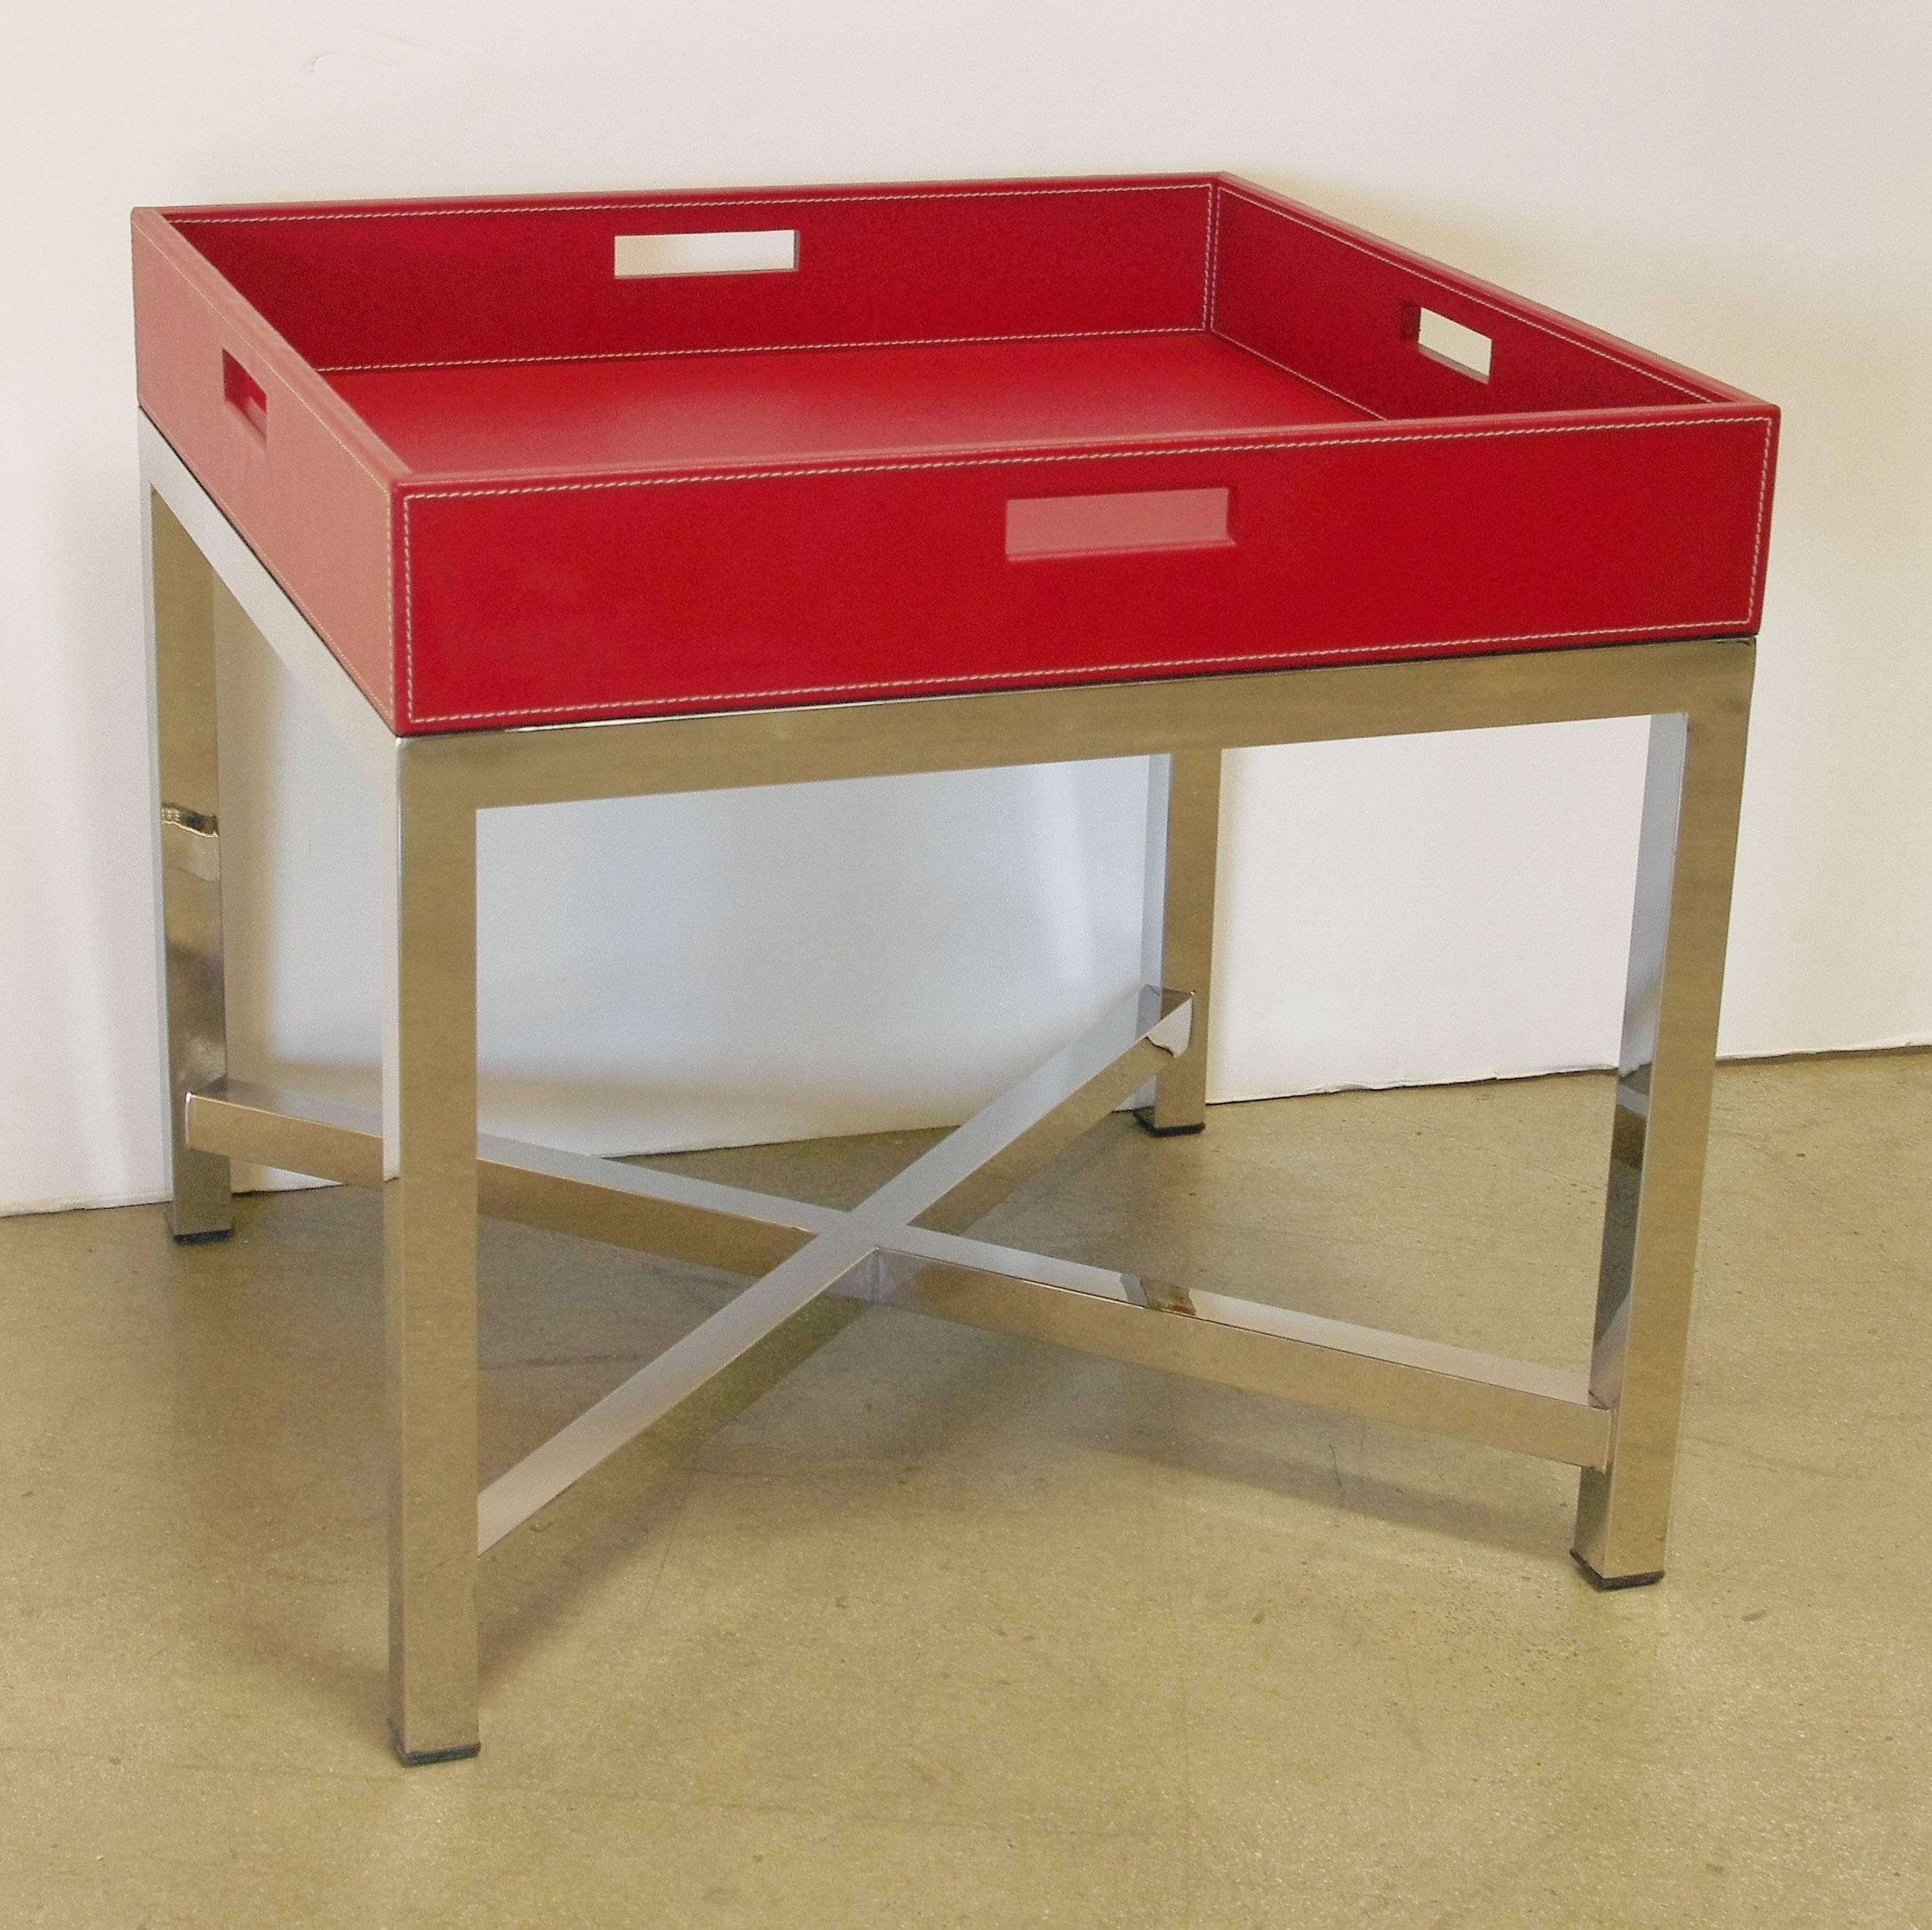 Red leather and stainless steel tray table designed by Fabio Bergomi for Fabio Ltd / Made in Italy
Height: 22